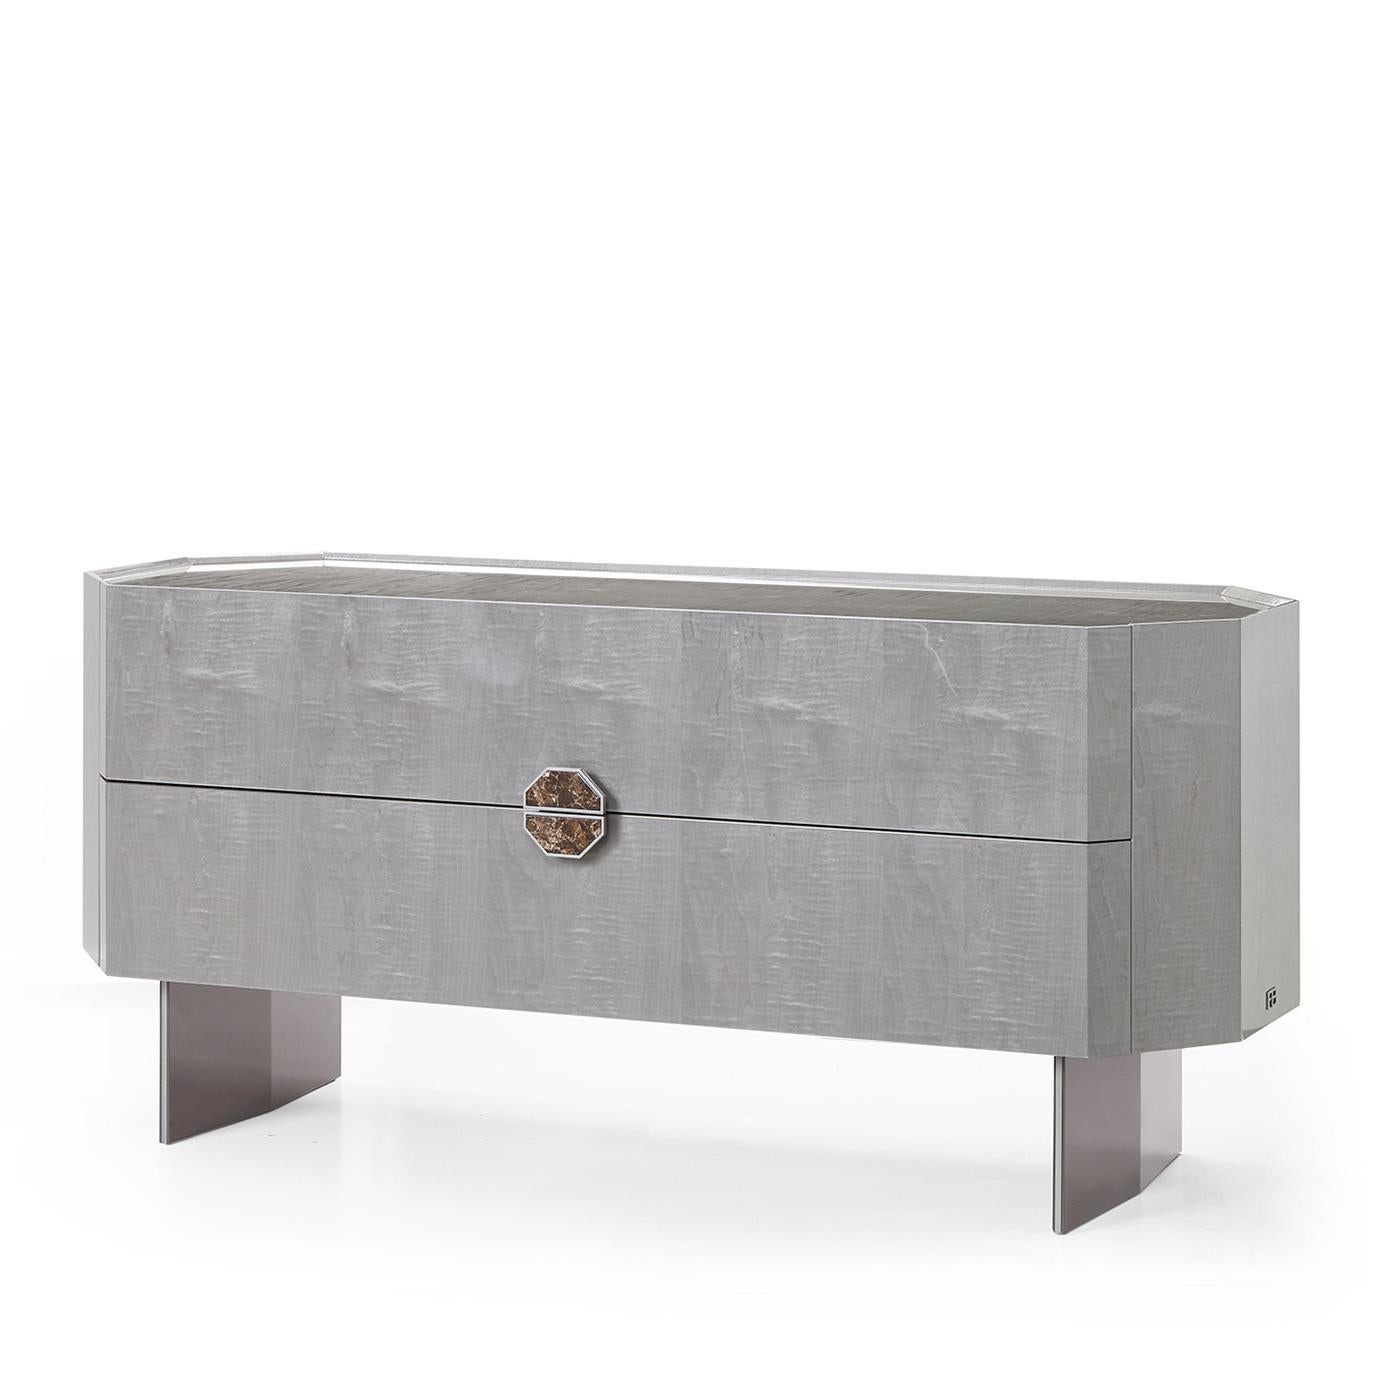 Chest ok 2 drawers with wooden top, metal trims and lacquered feet, open with handle - Lupo glossy finish, Emperador Dark marble handle, Nickel metal.